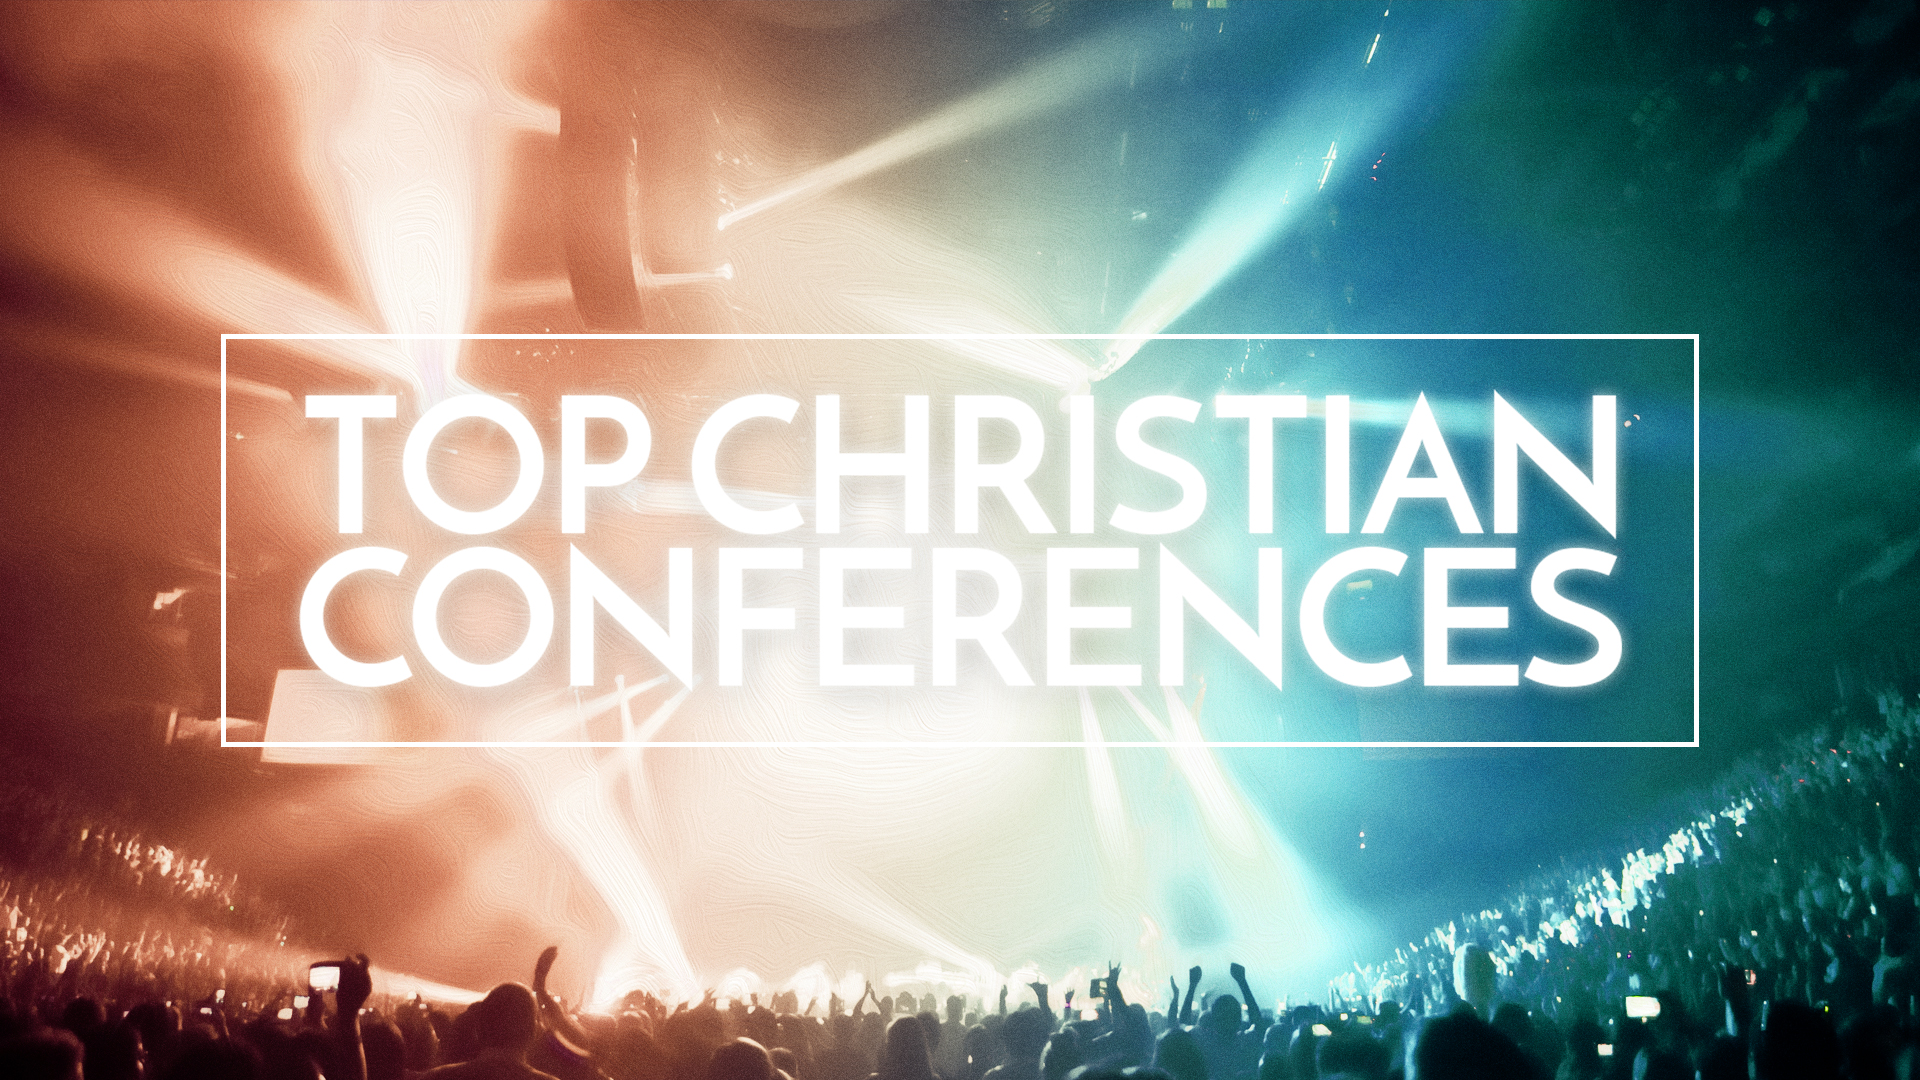 Top Christian Conferences